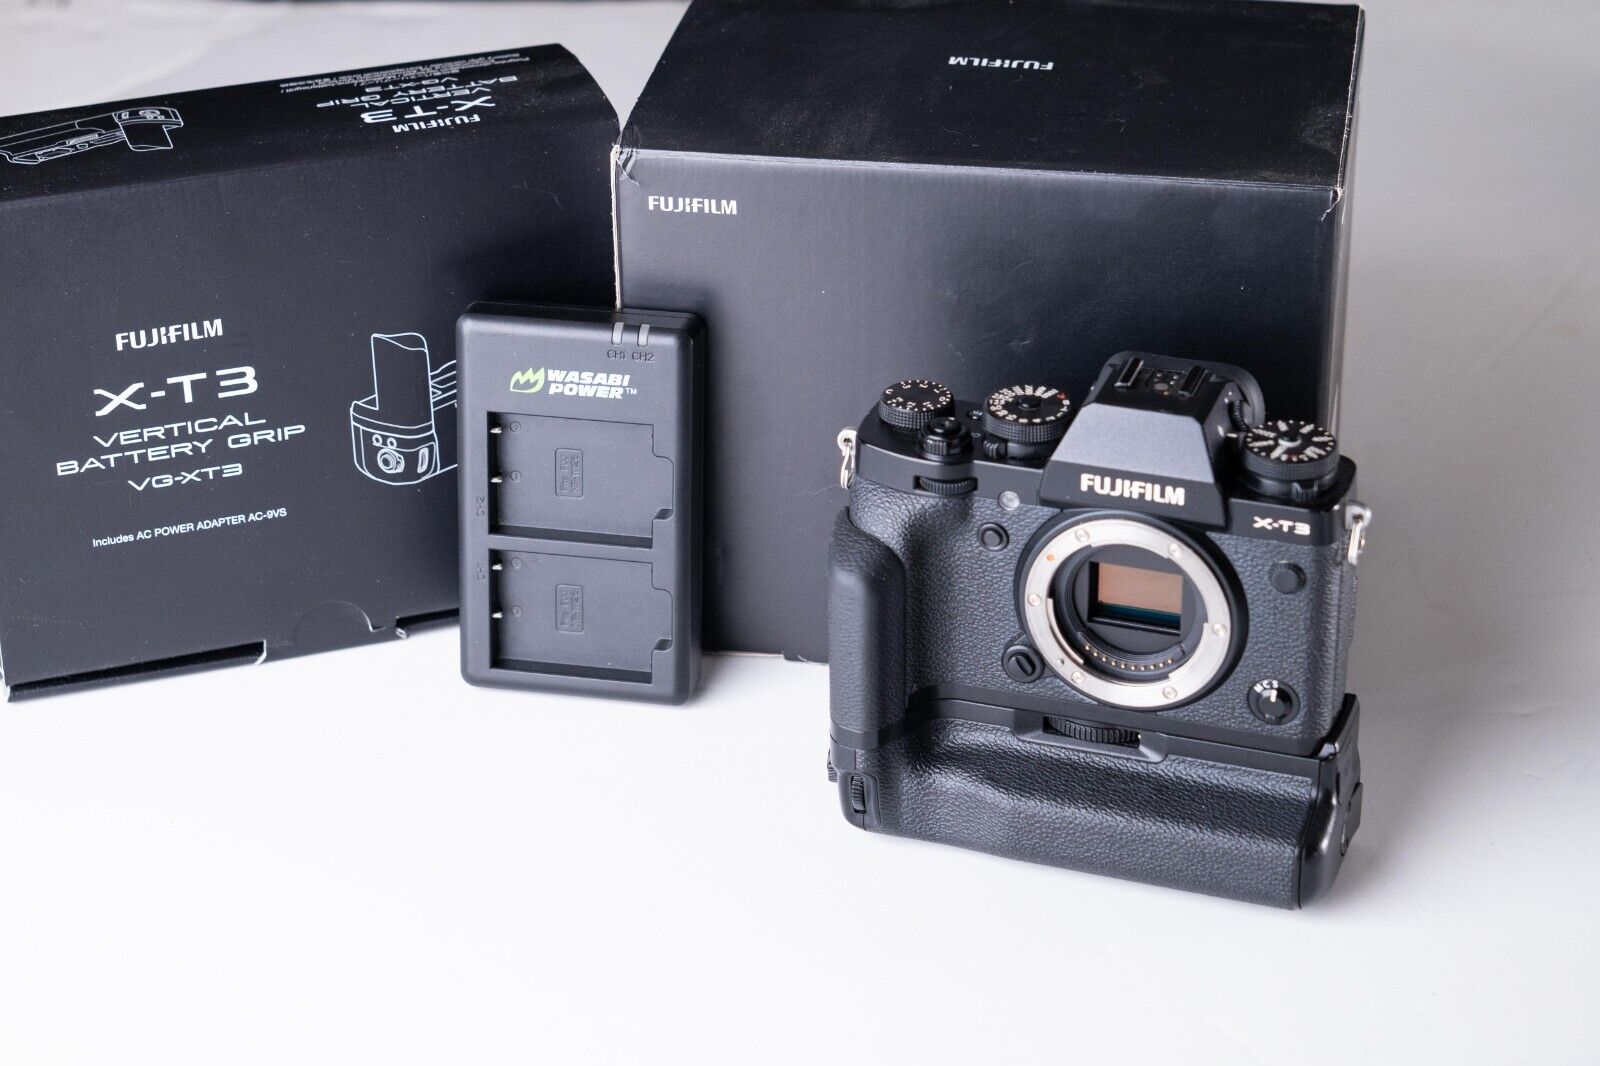 Fujifilm X-T3 26.1MP Digital Camera - Comes with Battery Grip and boxes